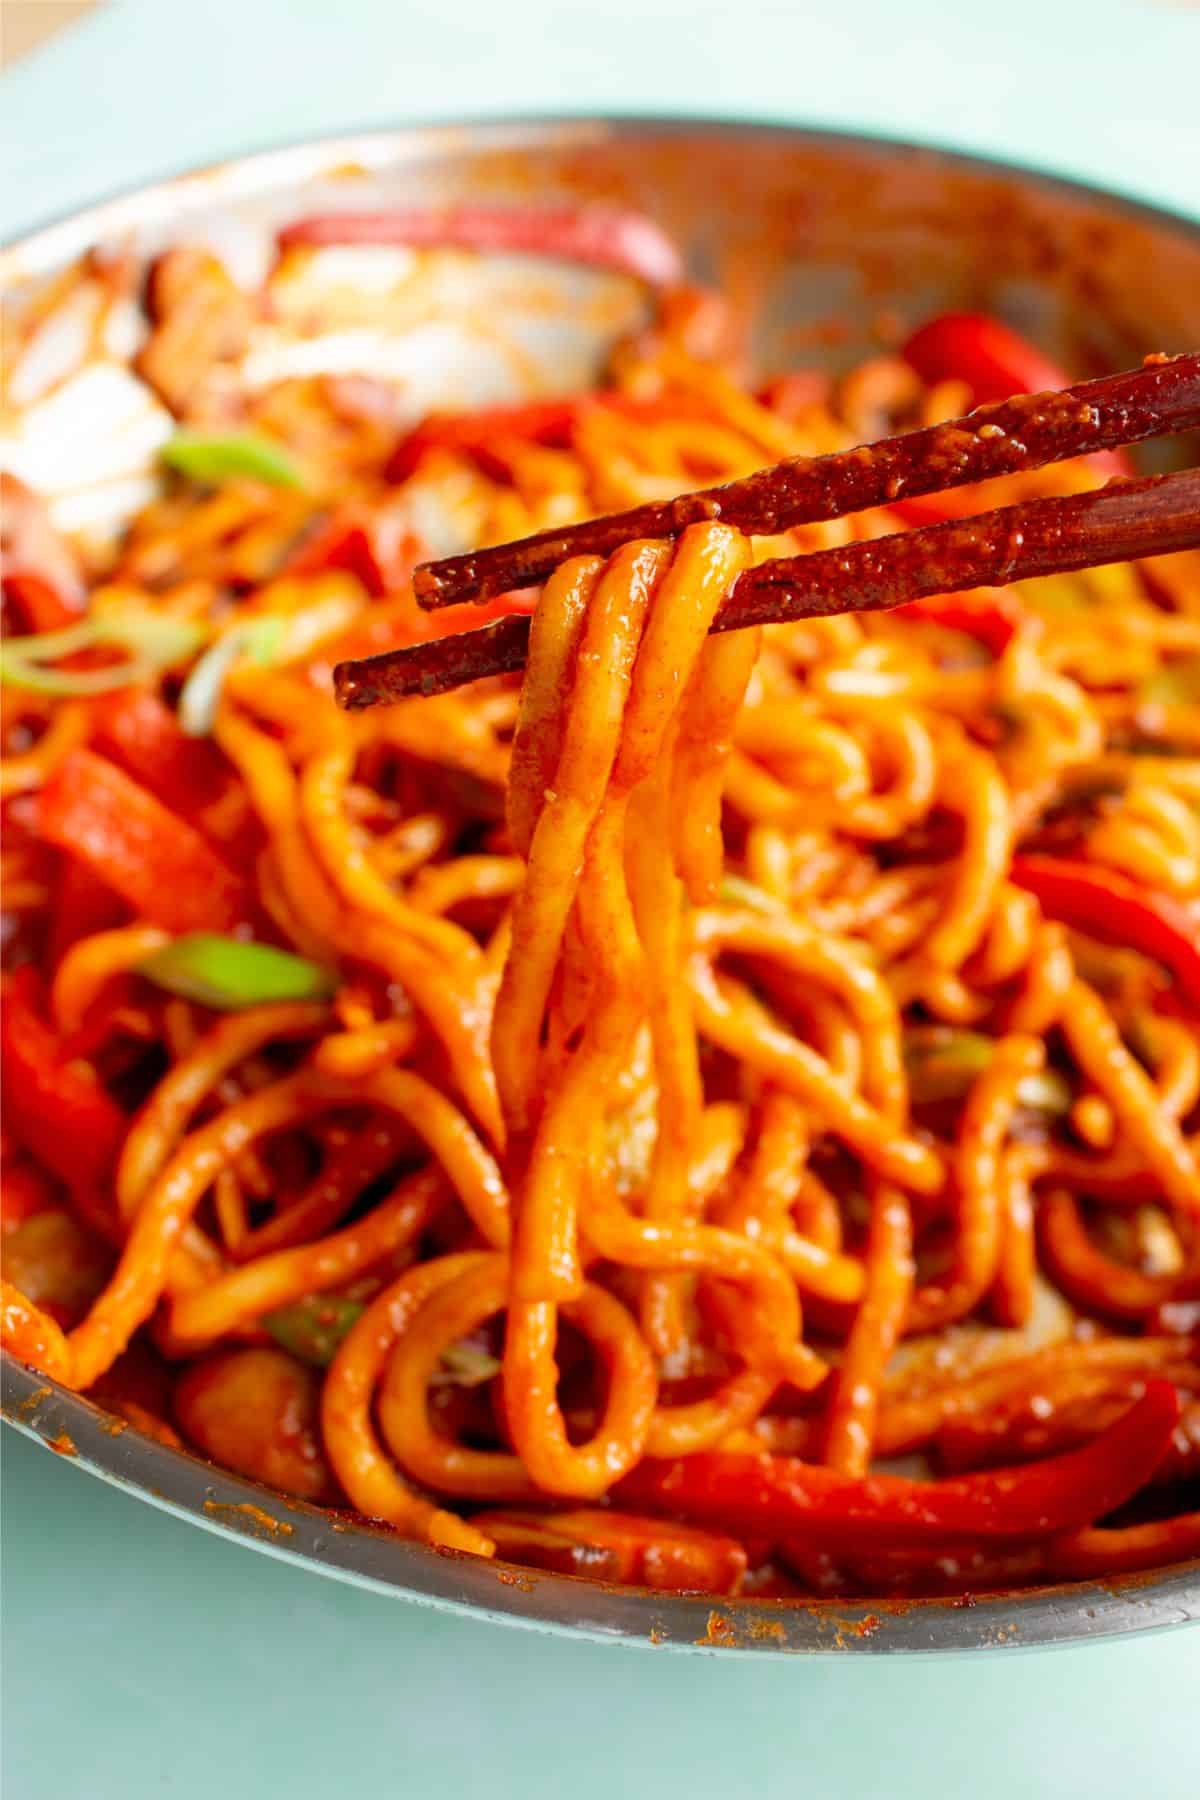 Noodles with chopsticks in pan with peppers and tomatoey red sauce in a stainless steel pan.